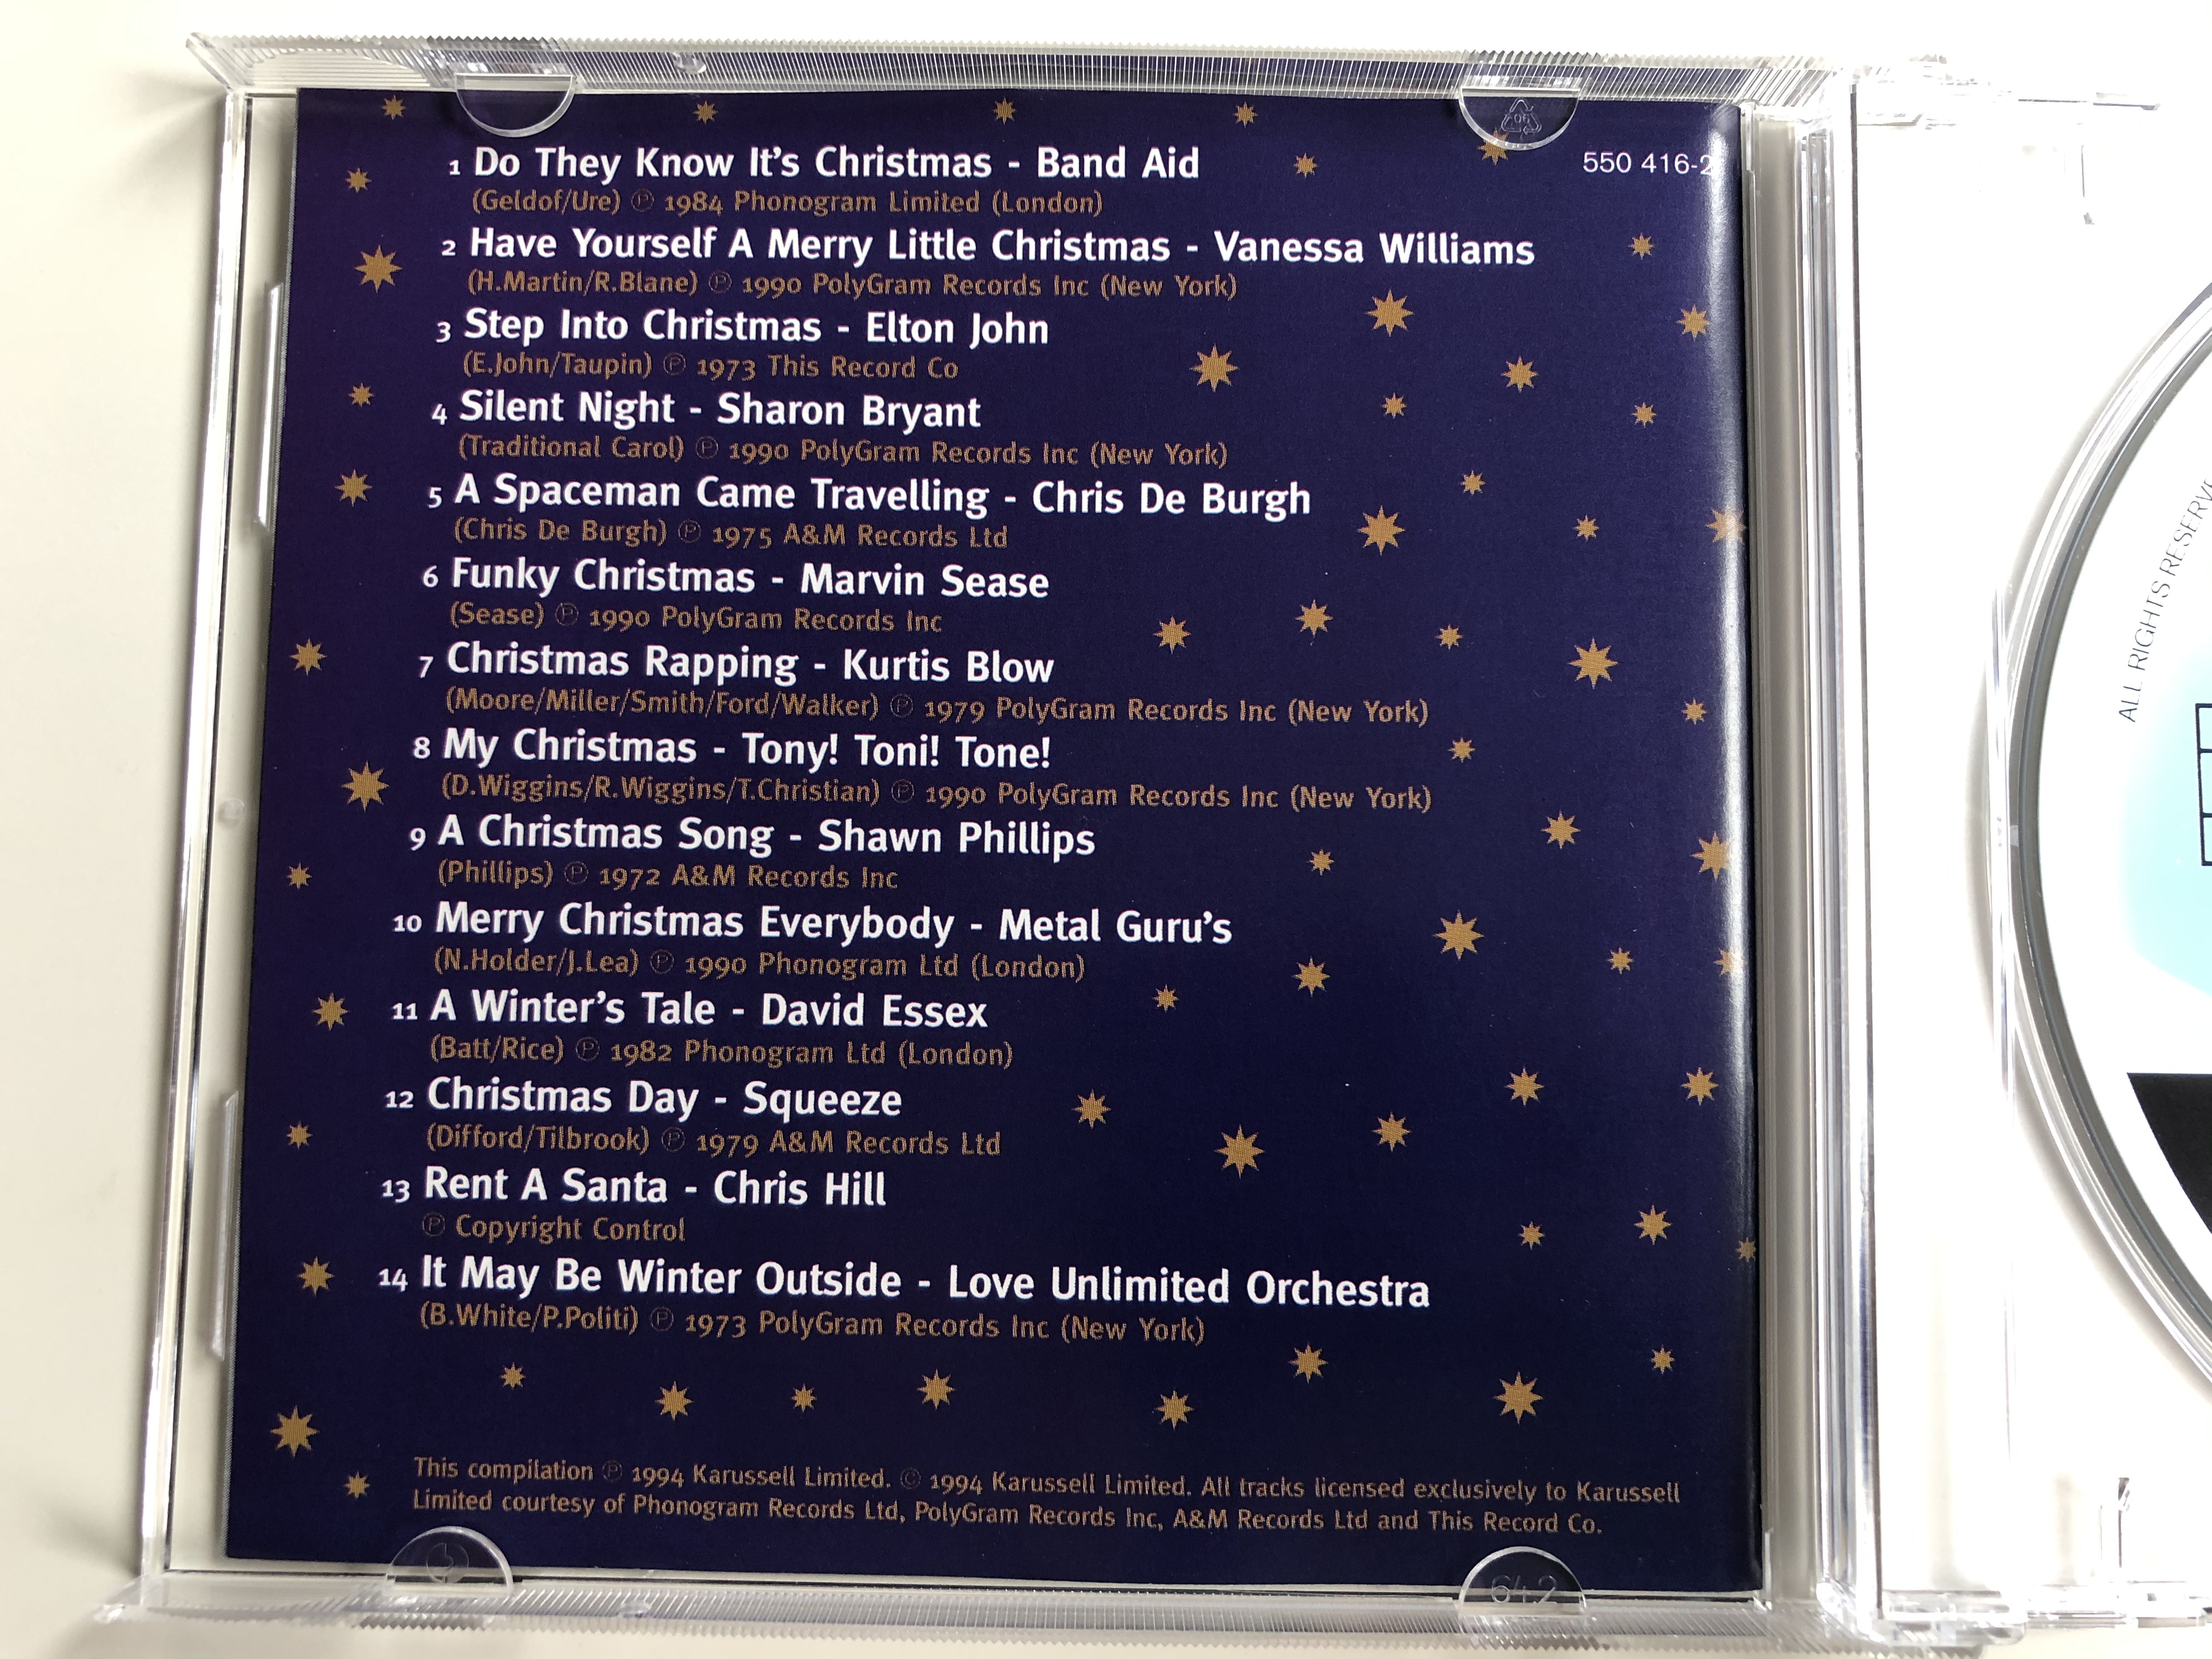 merry-christmas-from-band-aid-david-essex-chris-de-burgh-elton-john-and-others-karussell-audio-cd-1994-550-416-2-2-.jpg